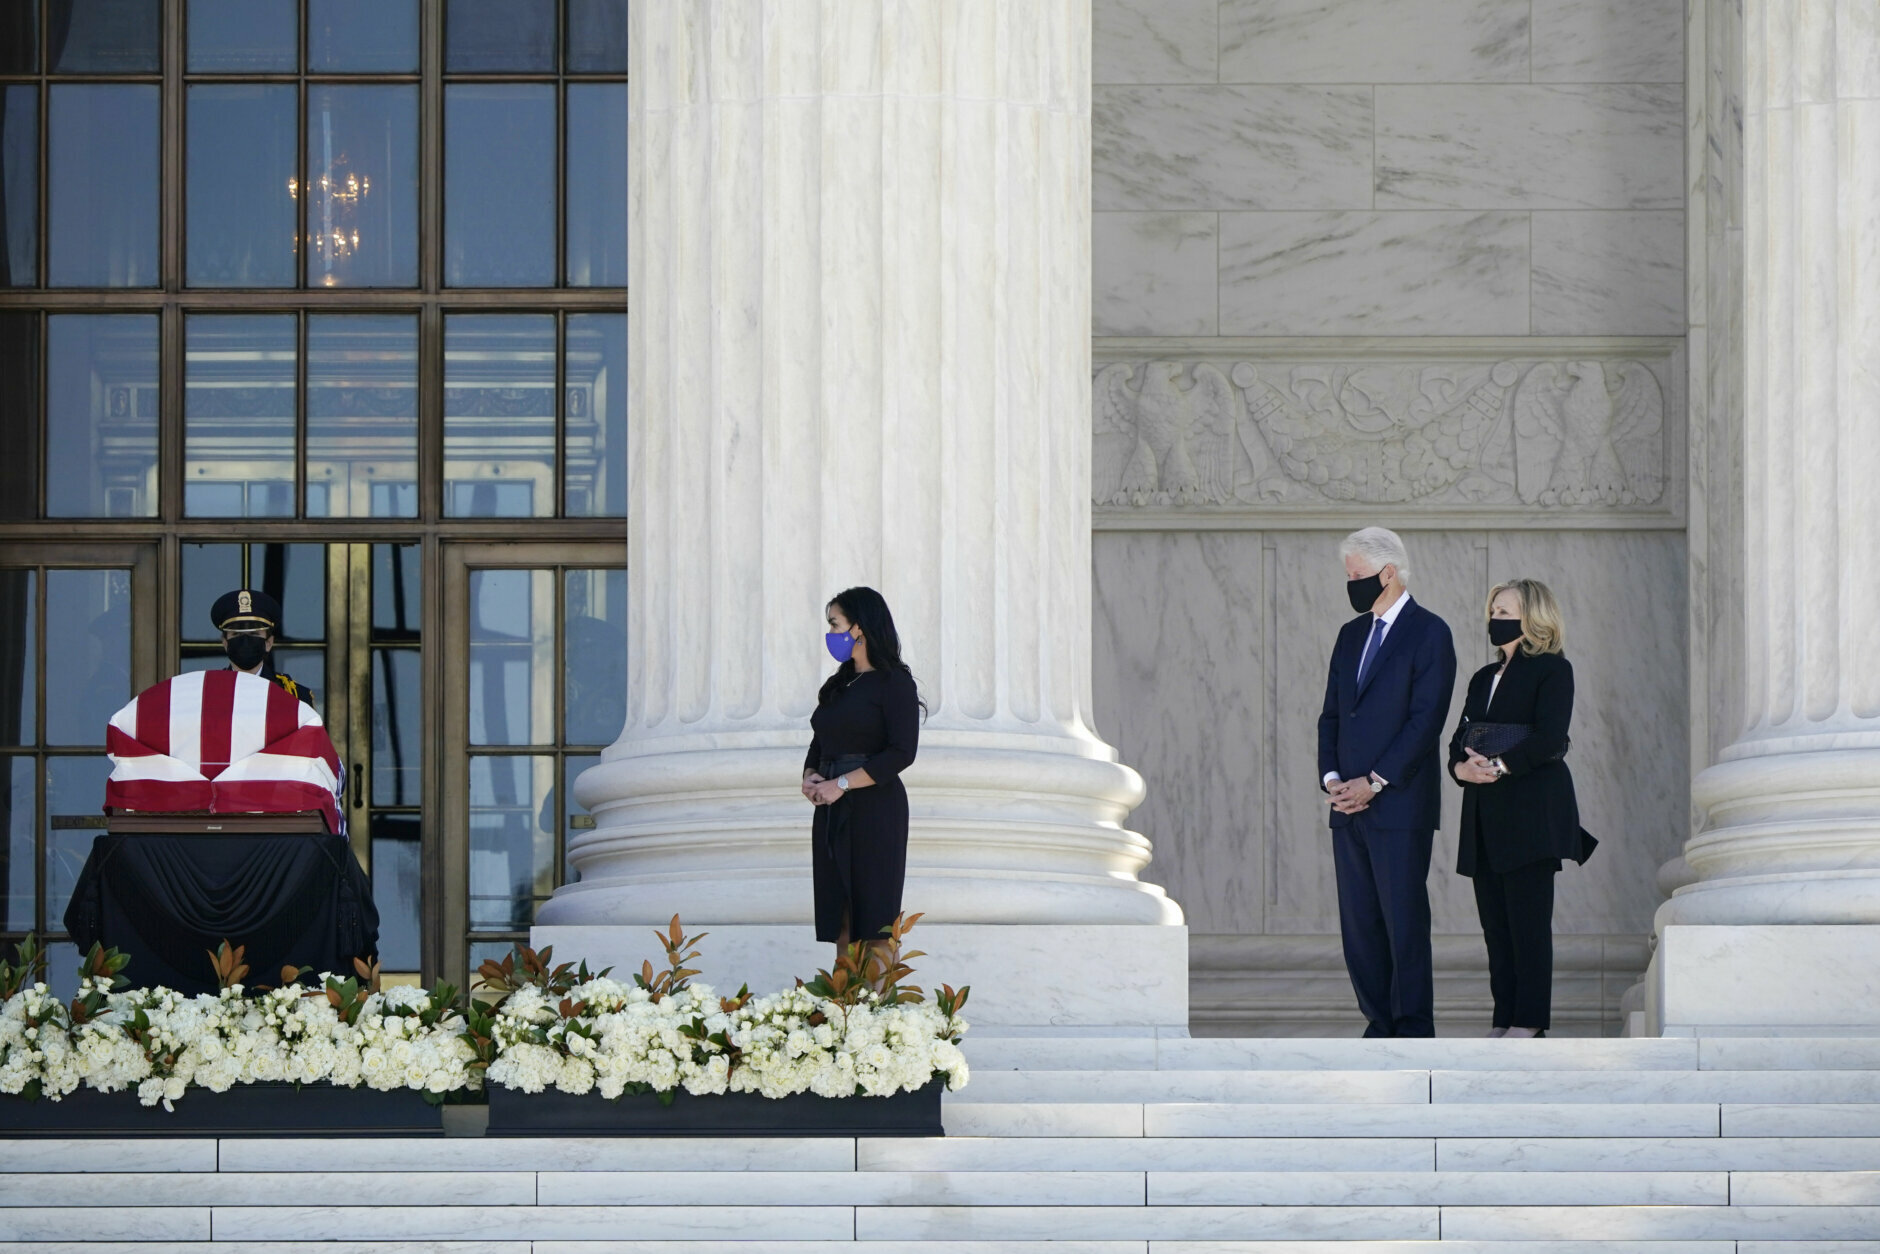 Former President Bill Clinton, second from right, and former Secretary of State Hillary Clinton pay respects as Justice Ruth Bader Ginsburg lies in repose under the Portico at the top of the front steps of the U.S. Supreme Court building on Wednesday, Sept. 23, 2020, in Washington. Ginsburg, 87, died of cancer on Sept. 18. (AP Photo/J. Scott Applewhite)